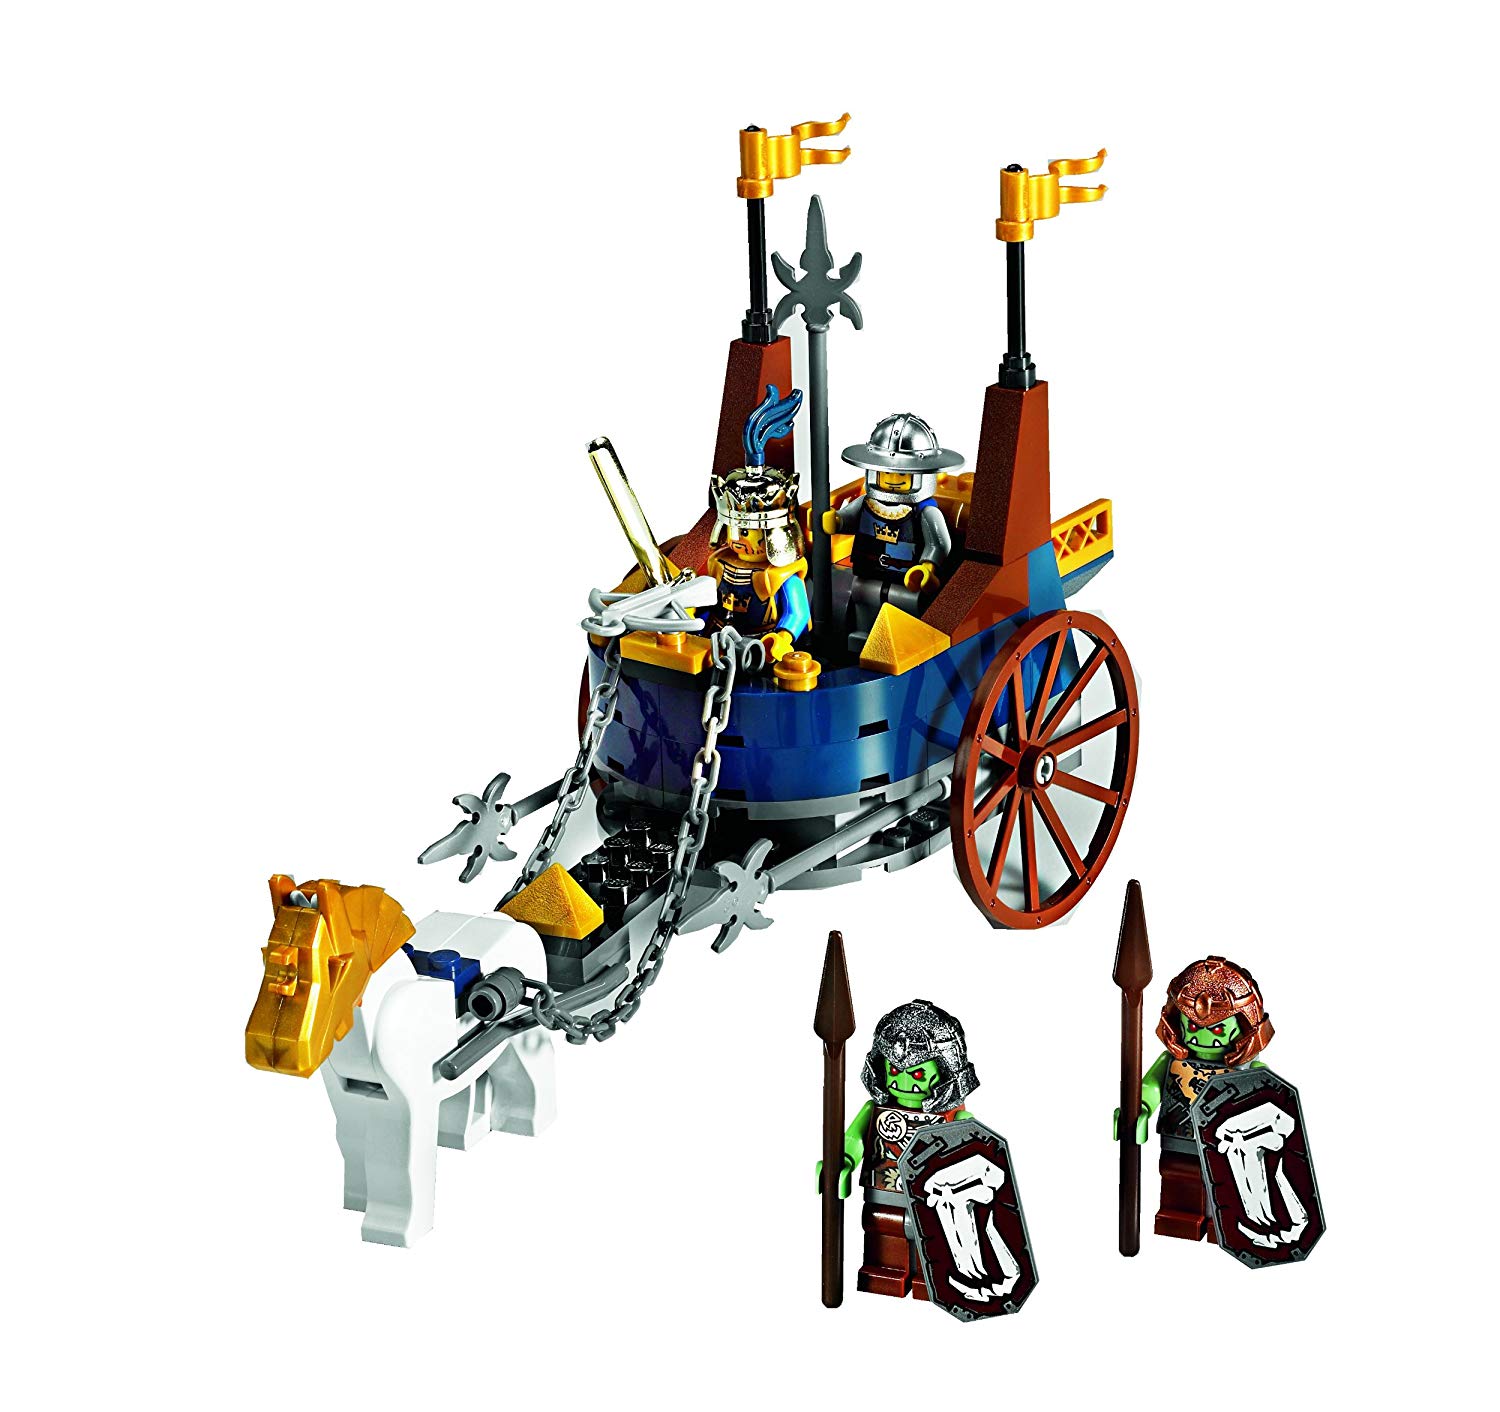 Lego Castle 7078 - Royal Attack Carriage (Exclusive To .Com)